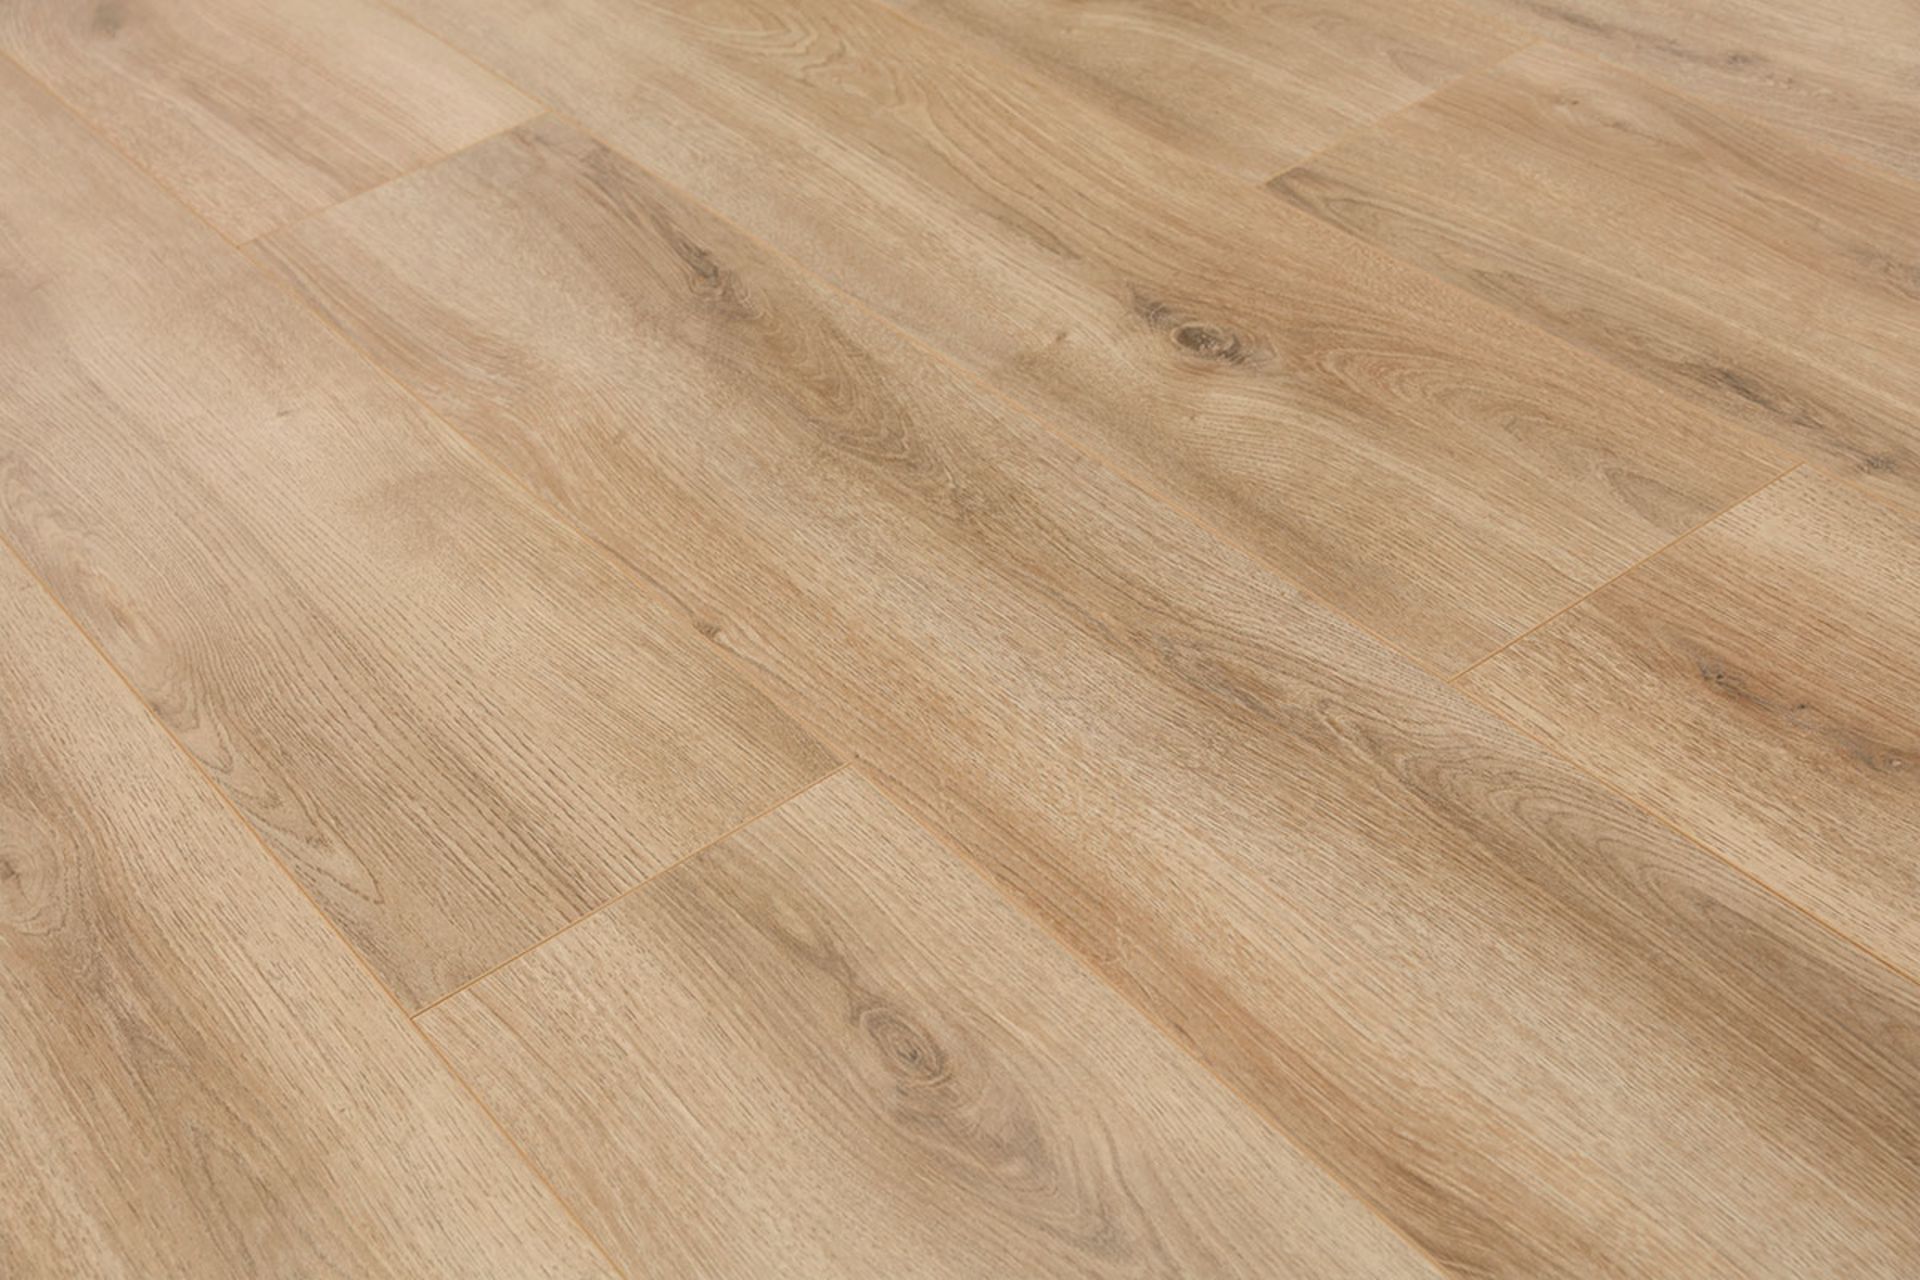 NEW 9.56 Square Meters of LAMINATE FLOORING SUMMER NATURAL OAK. With a warming natural oak tone... - Image 2 of 2